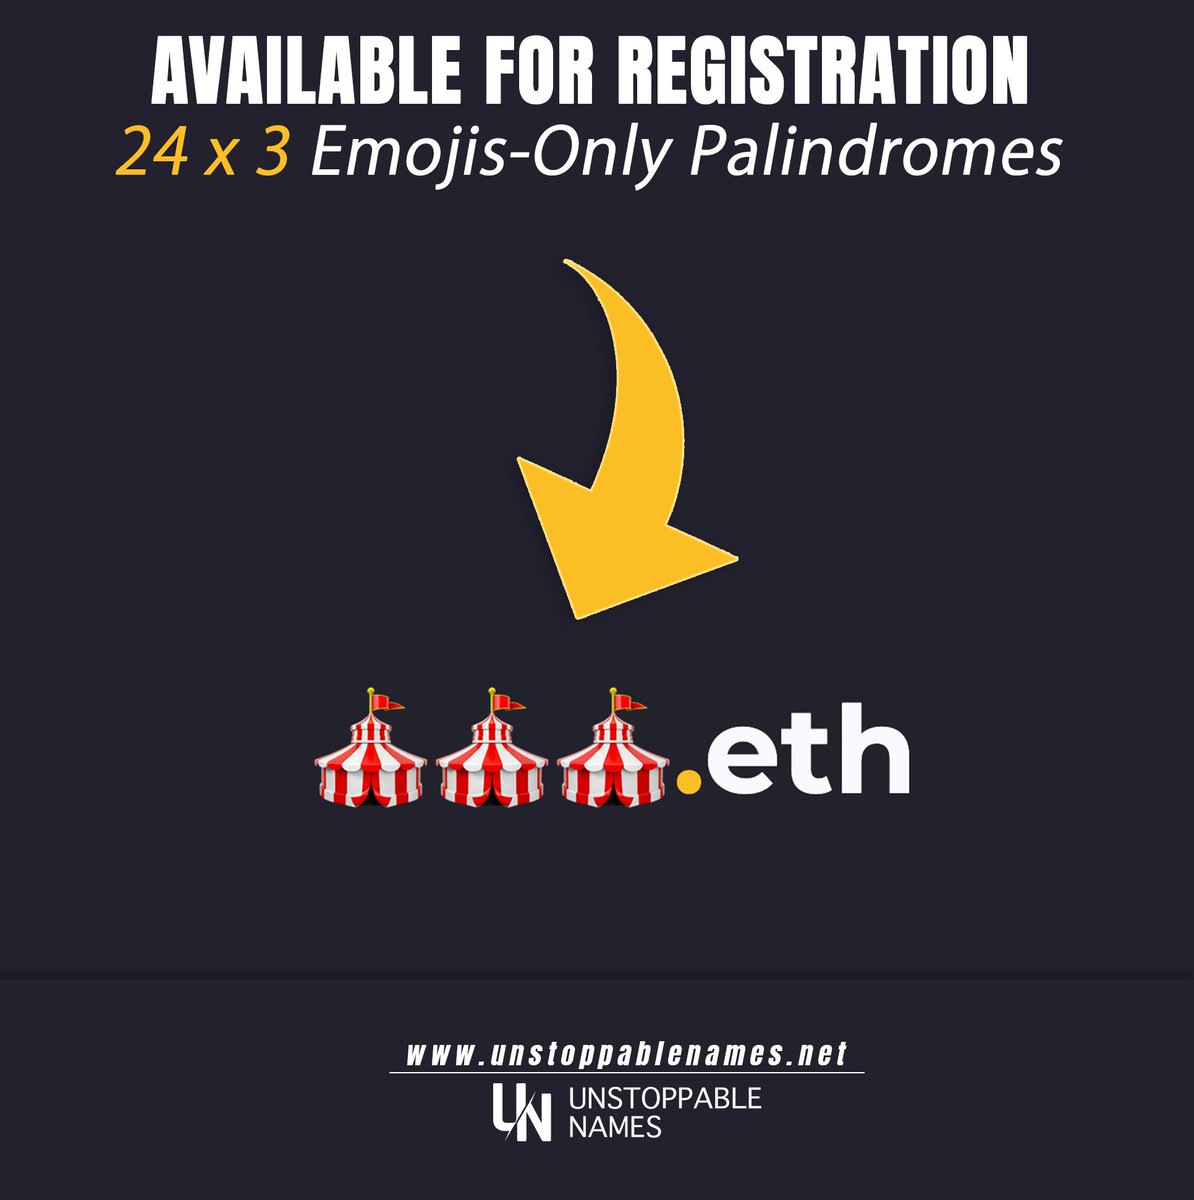 Get a list with 24 available Triple Ethmojis 🔥

Auction is live: swiy.co/24xTripleEthmo…

Register Triple Ethmojis Palindromes on ens vision

#ens #ensd #ensdomains #ethmoji #palindrome #ethdomain #ensvision #Etherium #ETH #WETH #NFT #OpenSeaNFT #emoji #emojidomain #ensvision